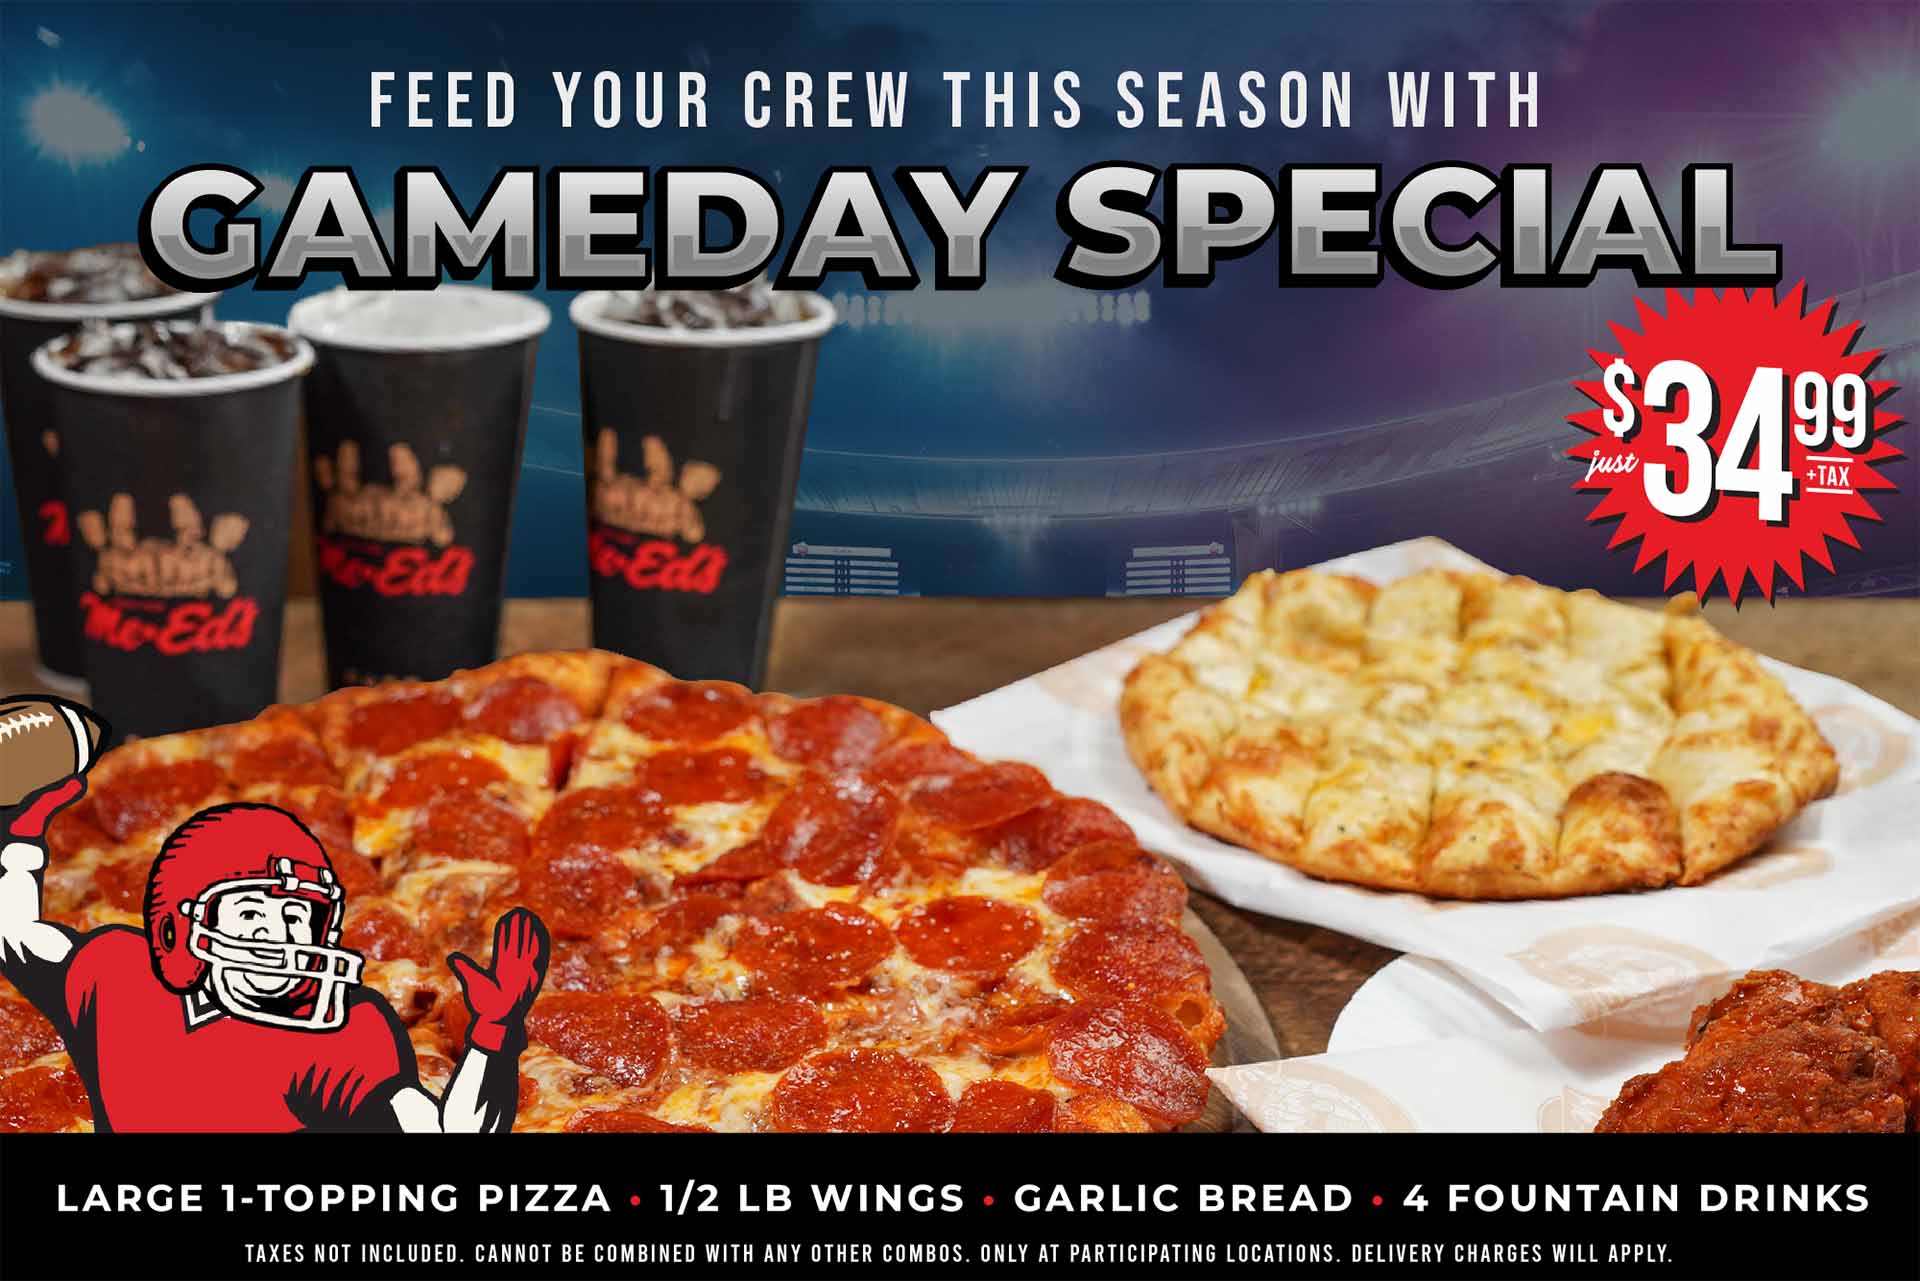 Feed your crew this season with the Gameday Special just $34.99 +tax. Large 1-topping, 1/2 LB wings, garlic bread, 4 fountain drinks. Taxes not included. Cannot be combined with any other combos. Only at participating locations. Delivery charges will apply.